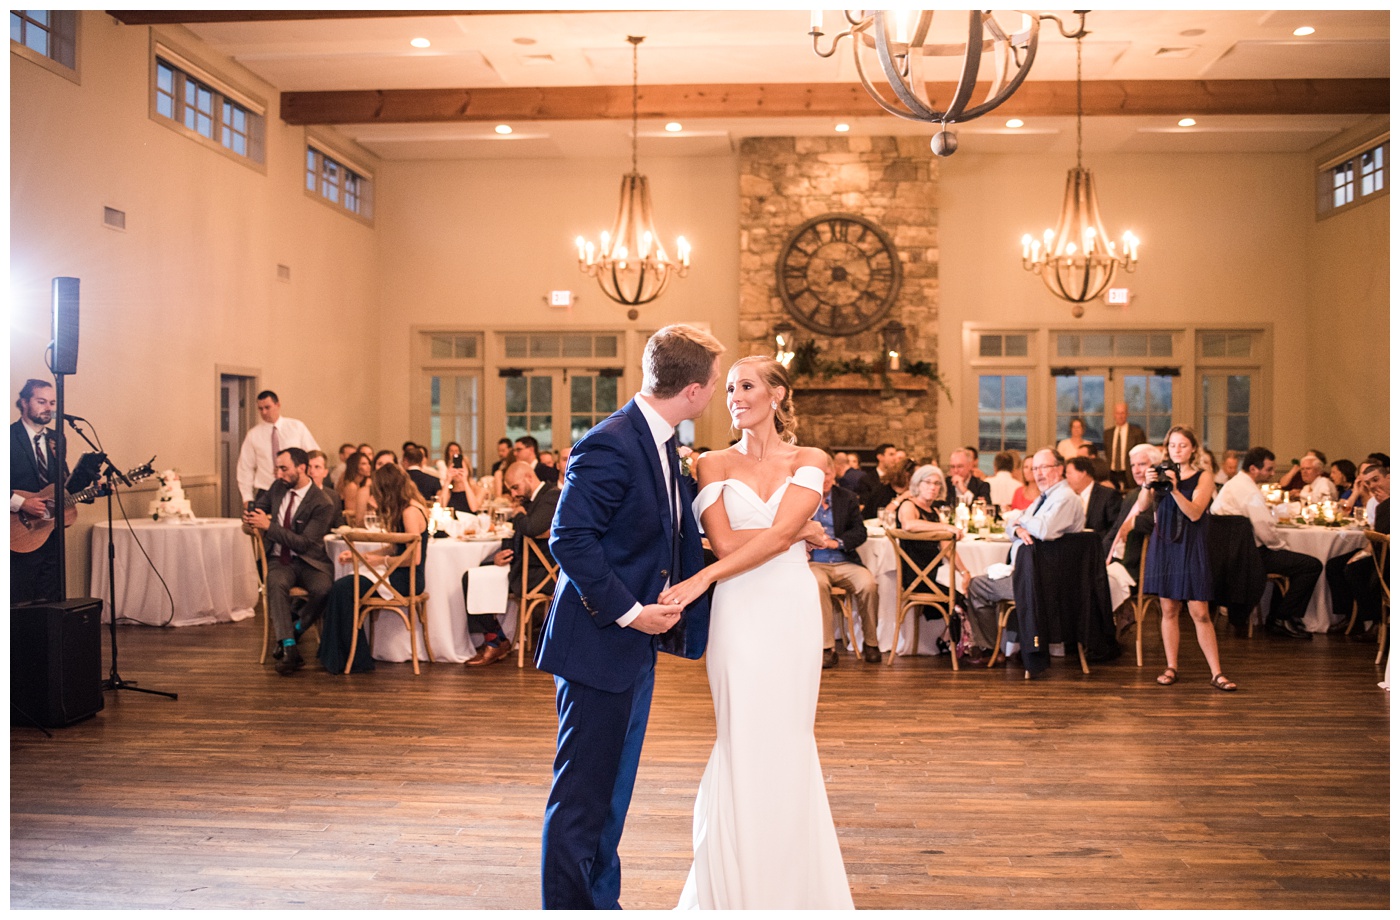 Bride and Groom dancing at their reception at King Family Vineyard in for Charlottesville Wedding.